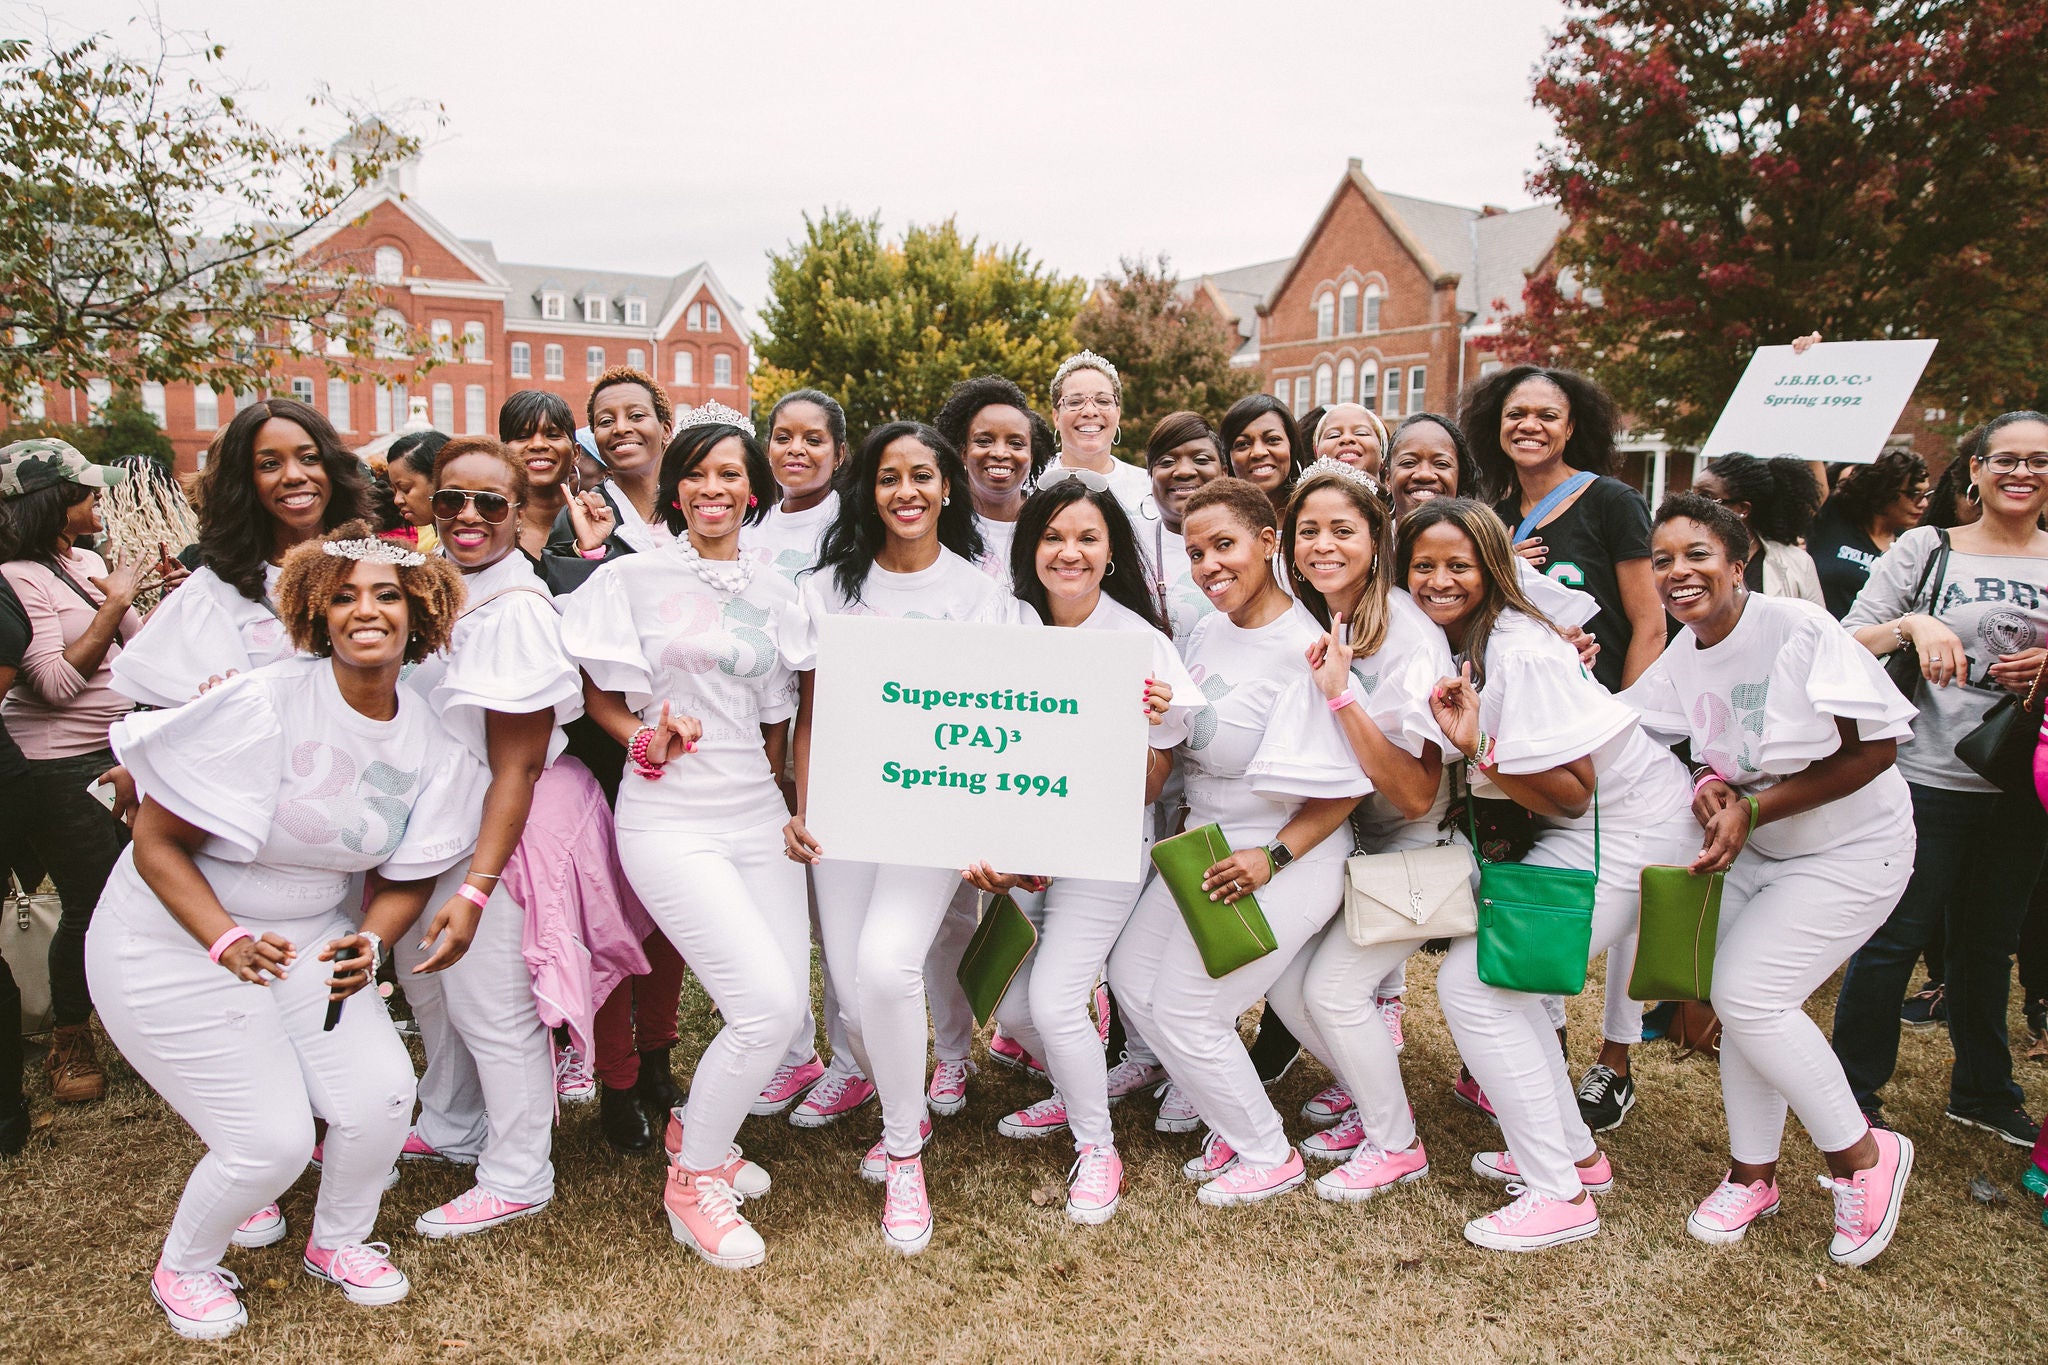 These Spelhouse Homecoming Weekend Photos Will Give You Major FOMO